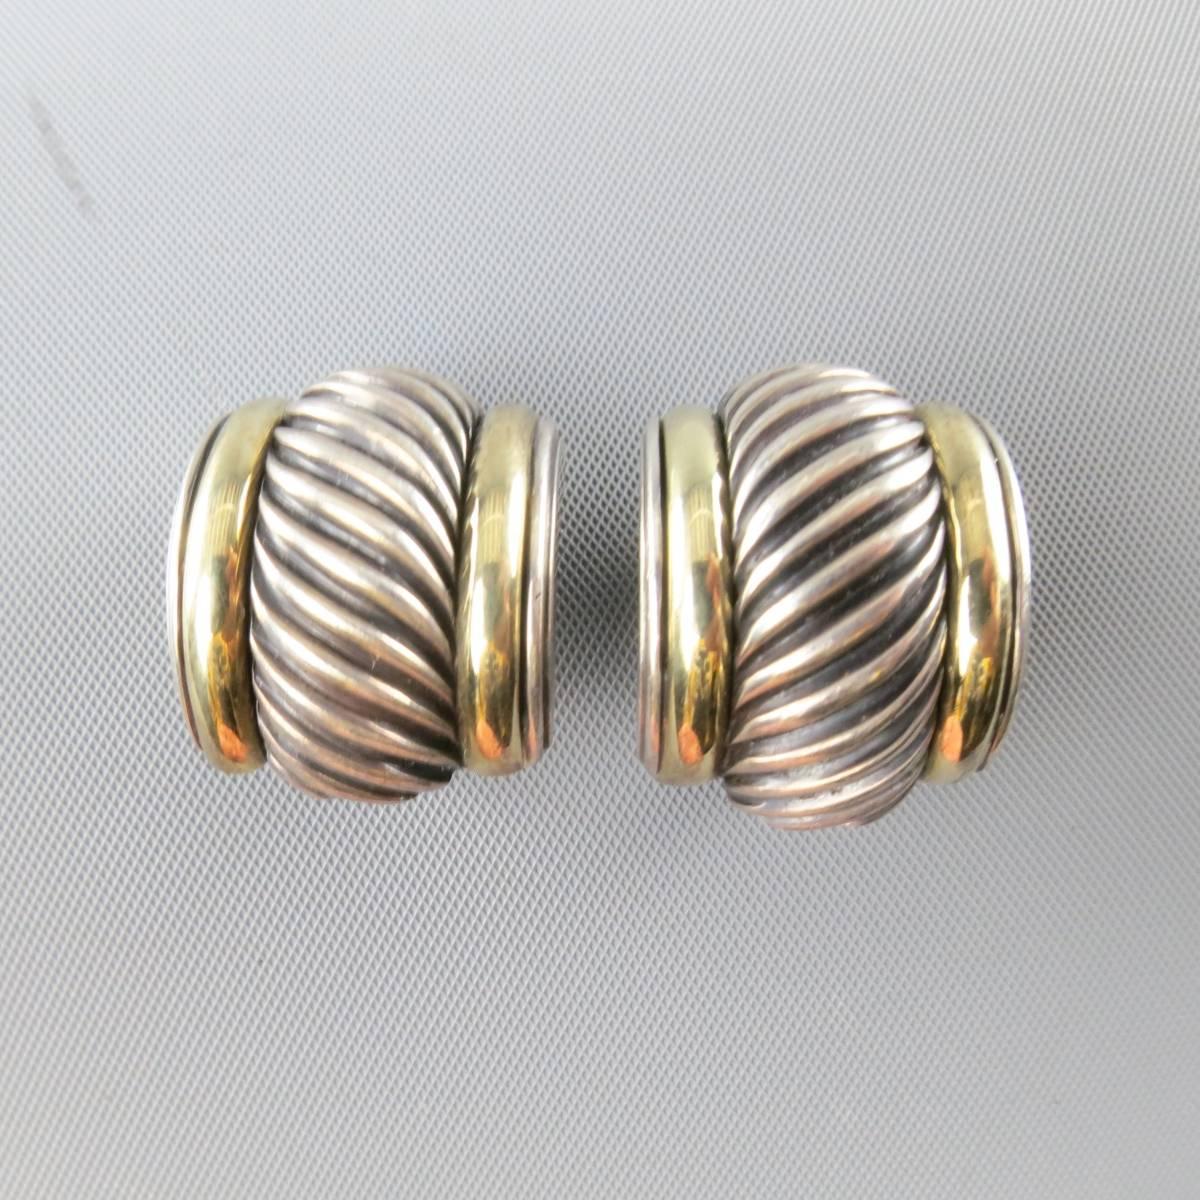 DAVID YURMAN post earrings come in a thick textured sterling silver half hoop with 14k gold piping.
 
Good Pre-Owned Condition.
Marked: 585 .925
 
Length: 2.45 cm.
Width: 1.45 in.


Web ID: 82034 